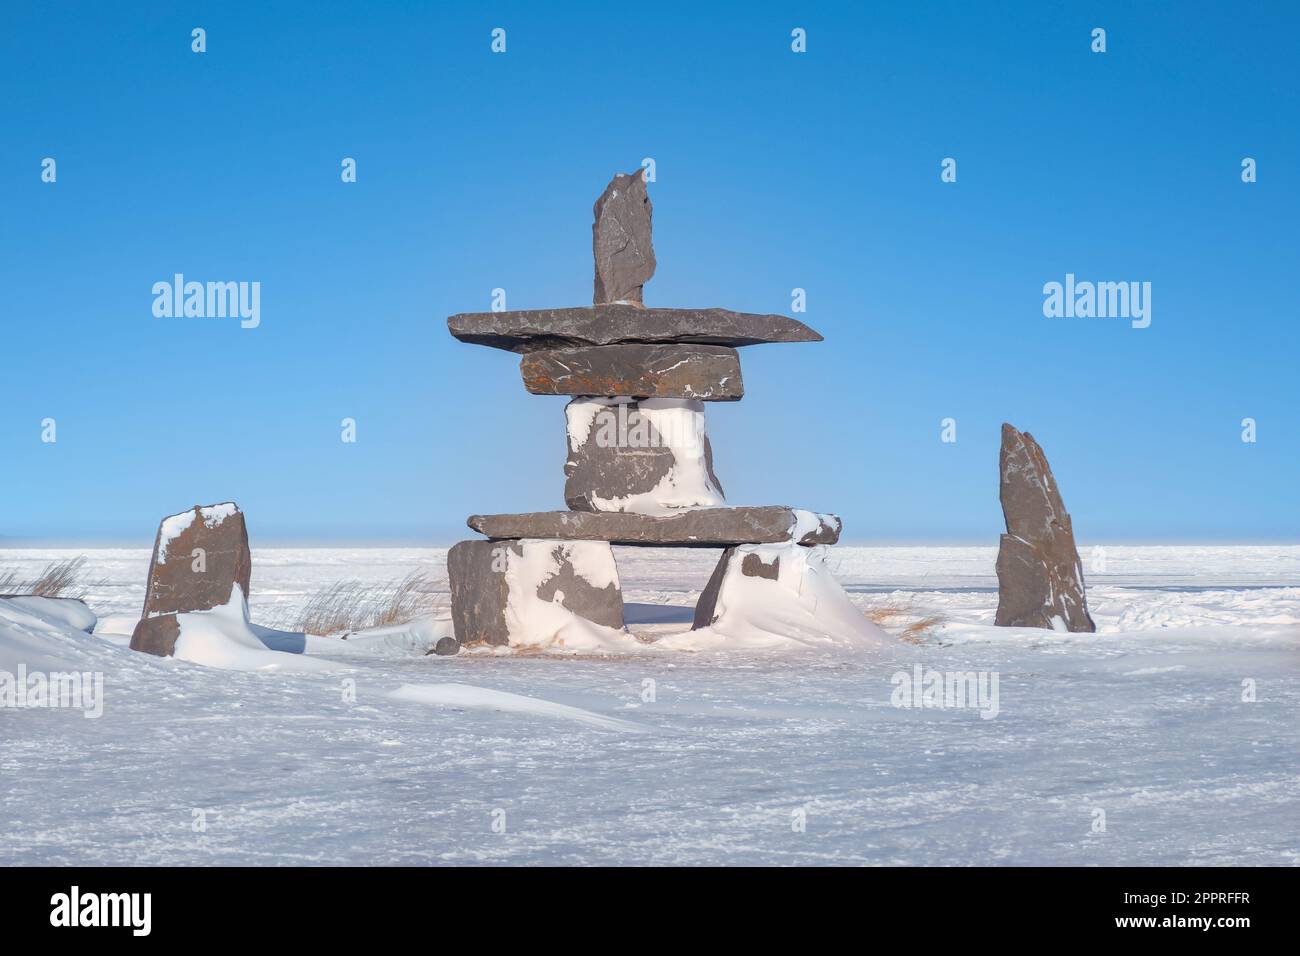 An Arctic cultural landmark known as an Inukshuk, used as navigational aids and communication by First Nations people in the Canadian north. Churchill Stock Photo